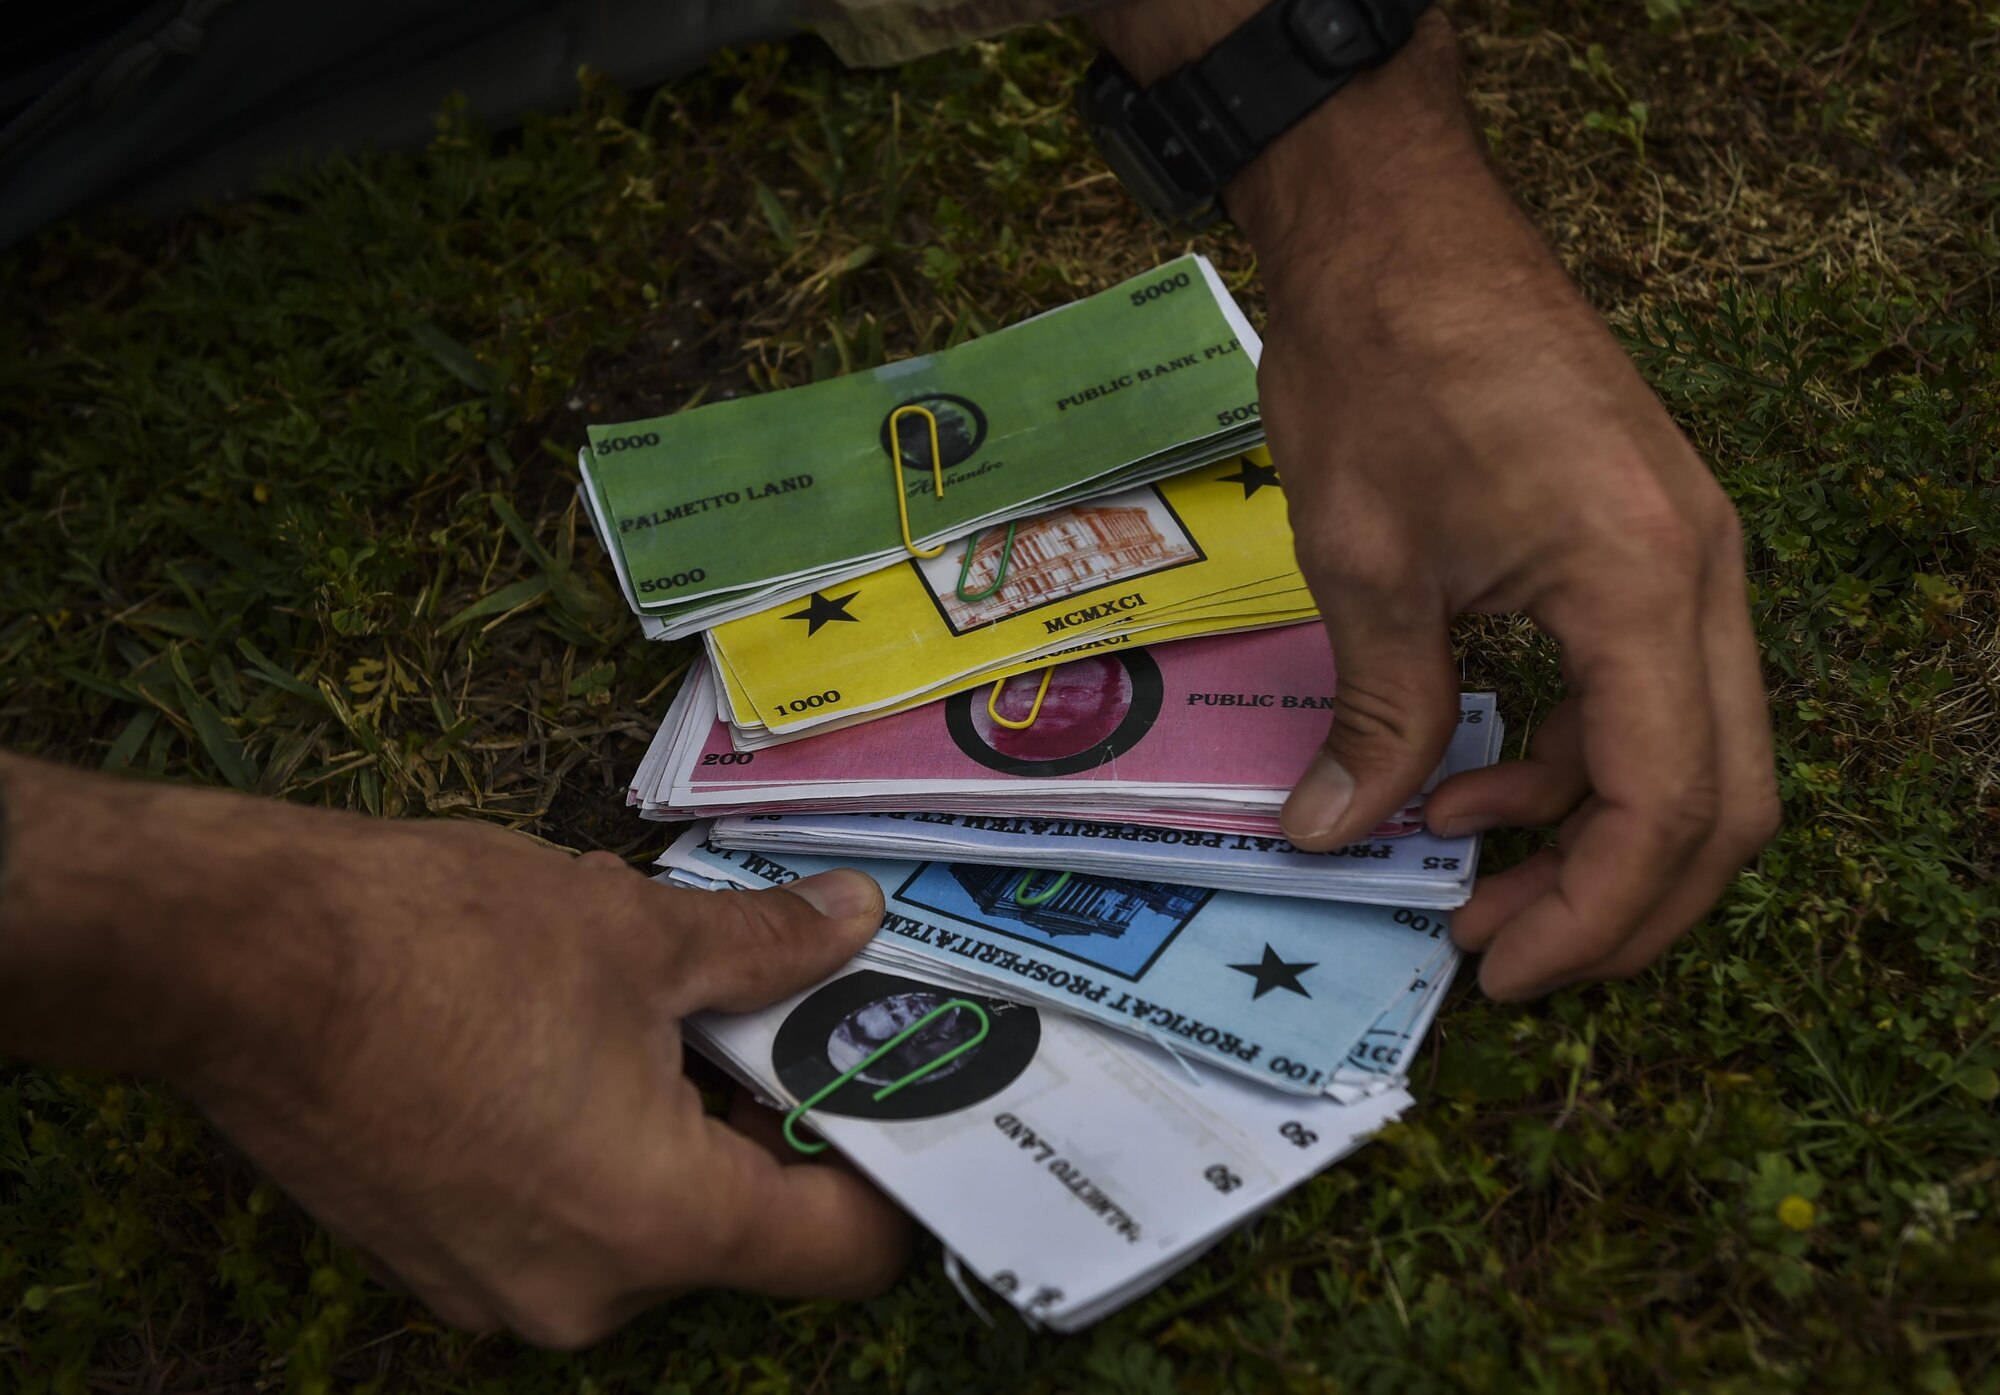 A 6th Special Operations Squadron combat aviation advisor student sorts “Palmetto Land” money during Operation Raven Claw at Hurlburt Field, Fla., April 24, 2017. Students traveled to “Palmetto Land,” a simulated indigenous country, where they were tasked to train and assist the "Palmetto Land" forces in enhancing the tactical employment of its aircraft and soldiers. (U.S. Air Force photo by Airman 1st Class Joseph Pick)